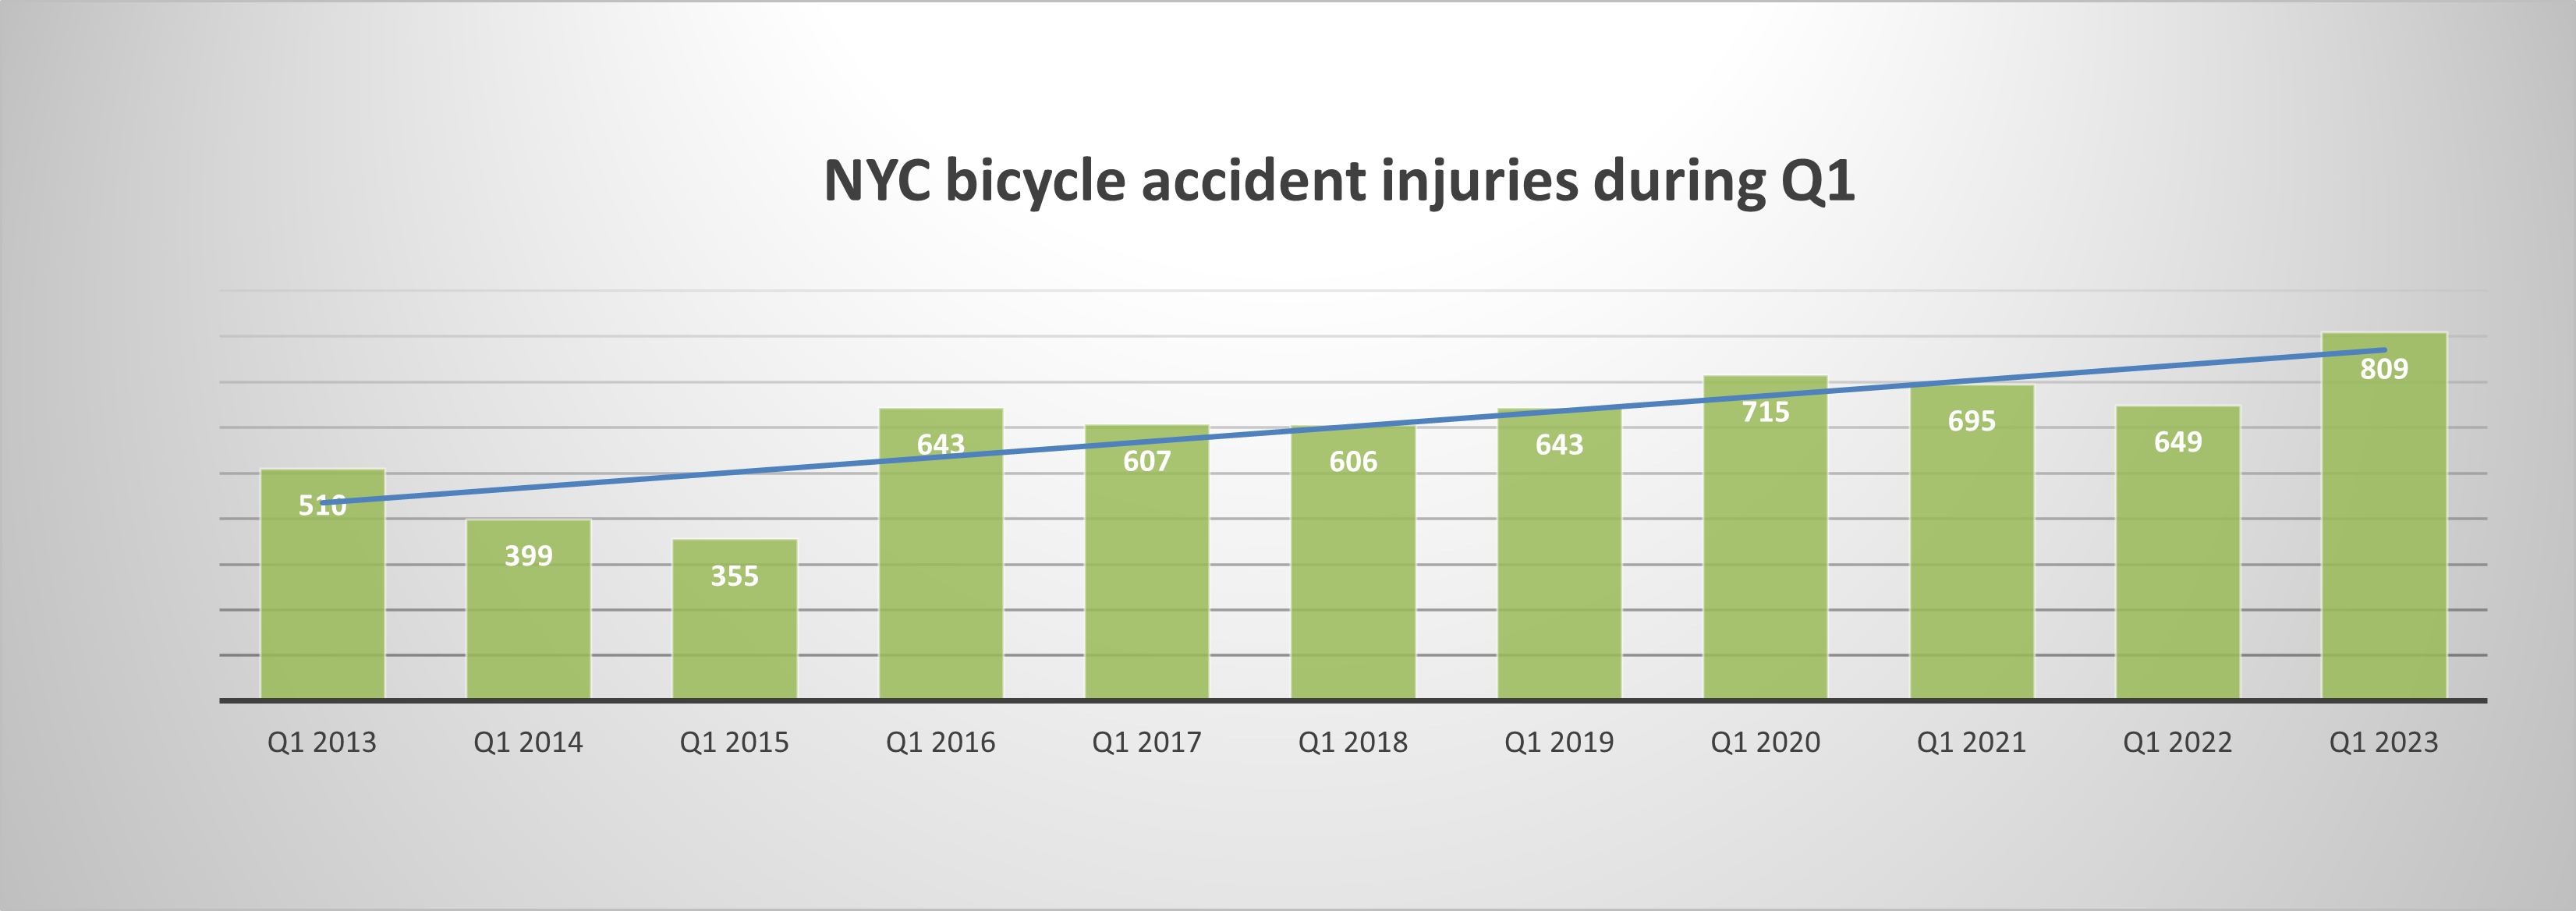 New York City bicycle accident injuries Q1 2023